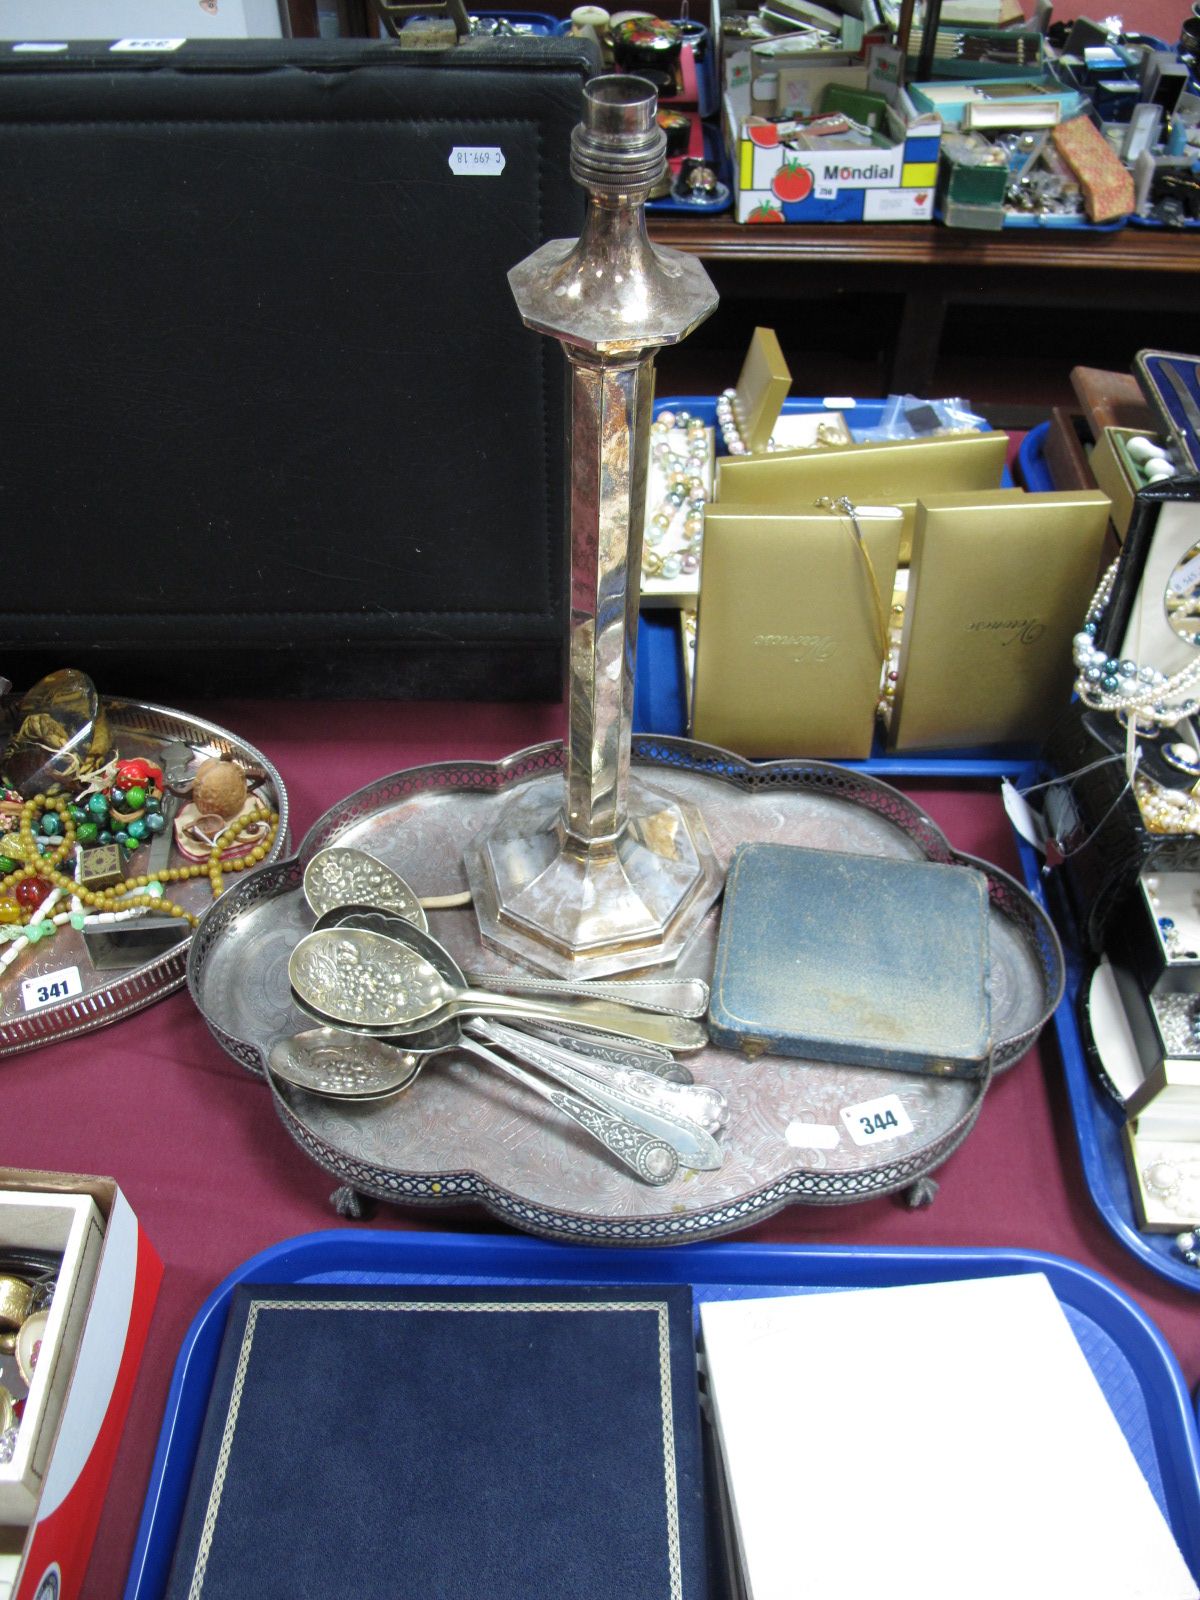 Gladwin Embassy Plate Octagonal Table Lamp, a tray on four claw feet, and cutlery.